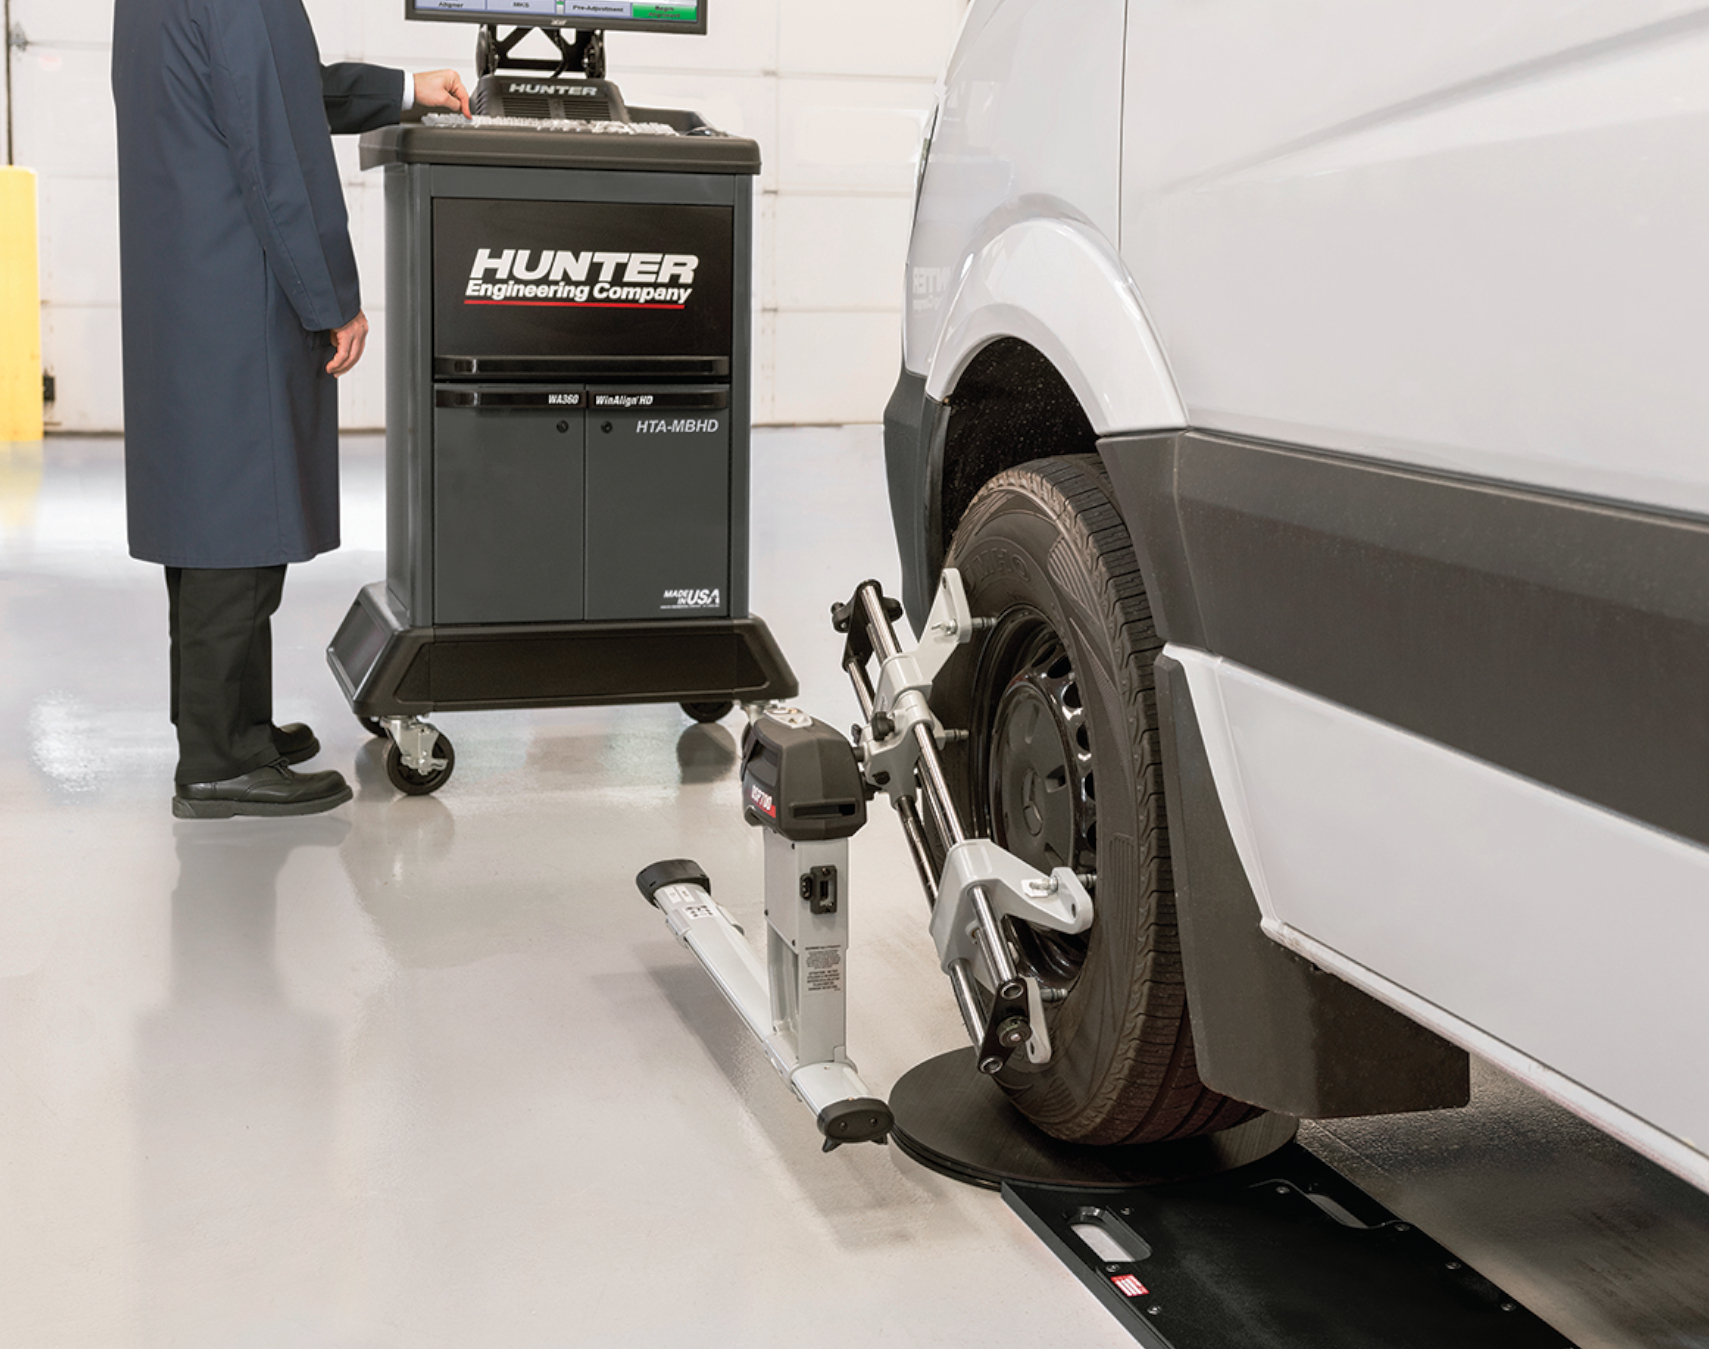 How Long Does a Wheel Alignment Take?